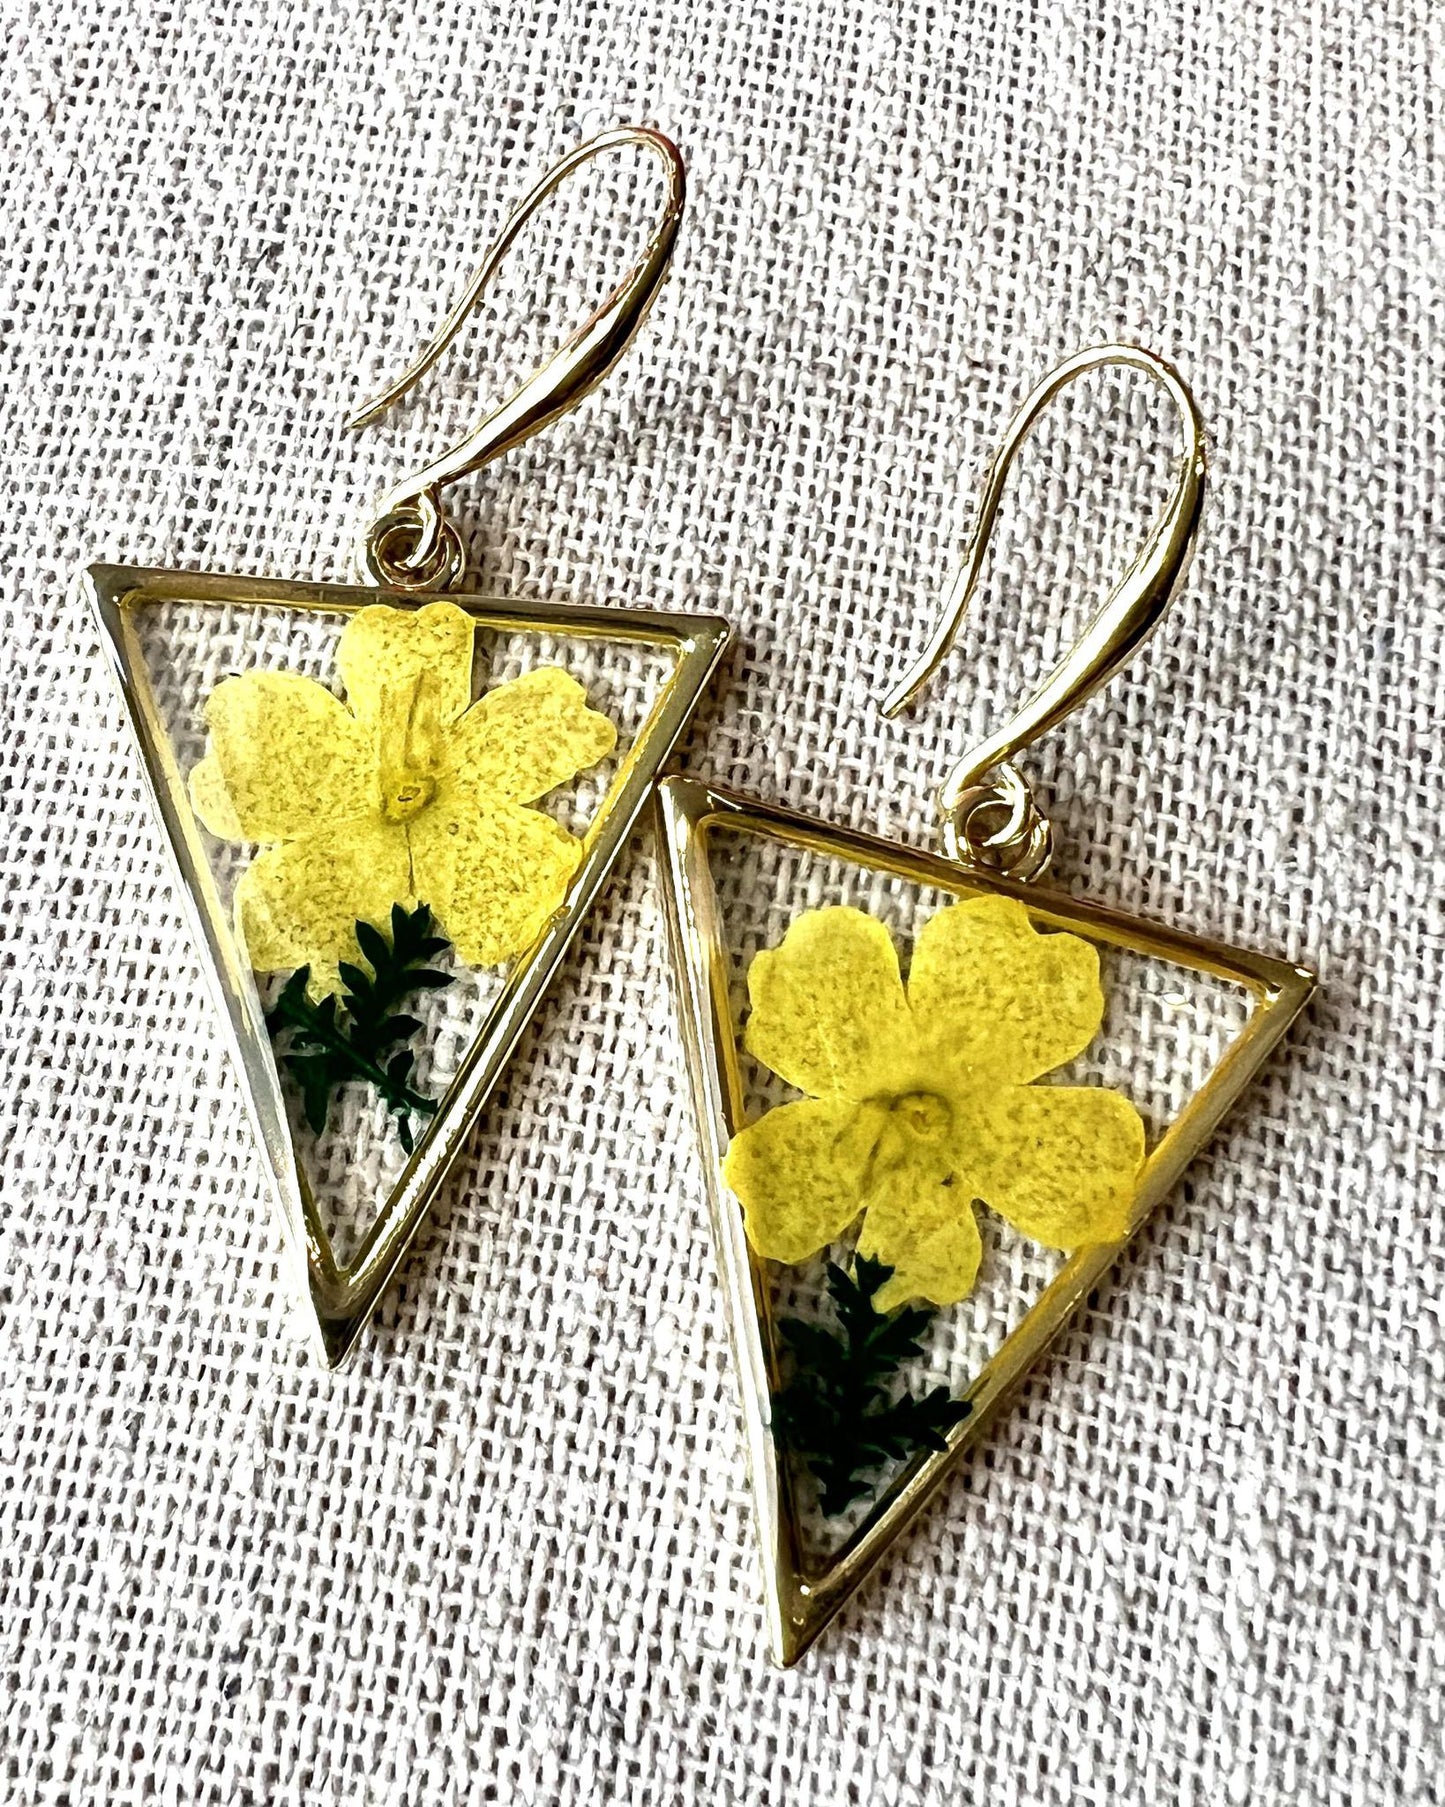 Pajaro Negro 24k Gold Fill Upside Down Triangle Earrings with Yellow Flower